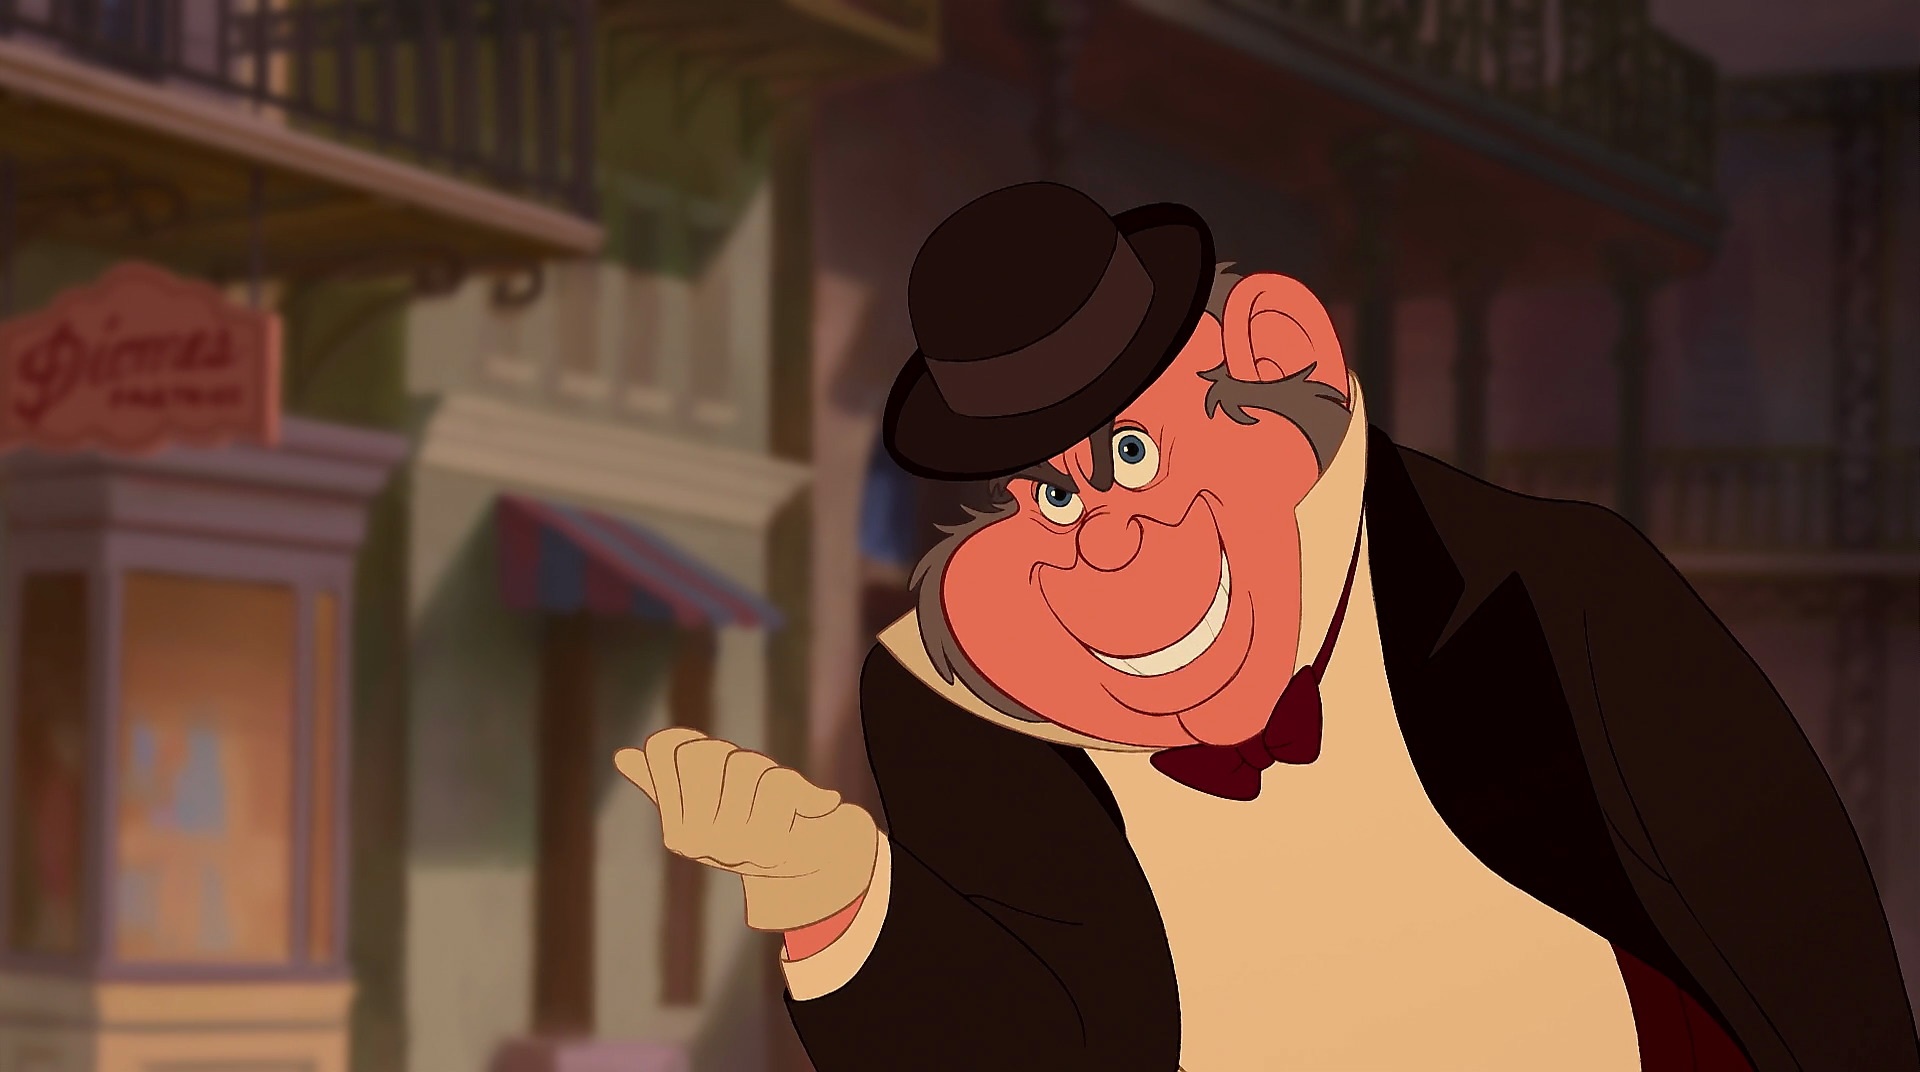 Lawrence (The Princess and the Frog) - Disney Wiki - Wikia1920 x 1072